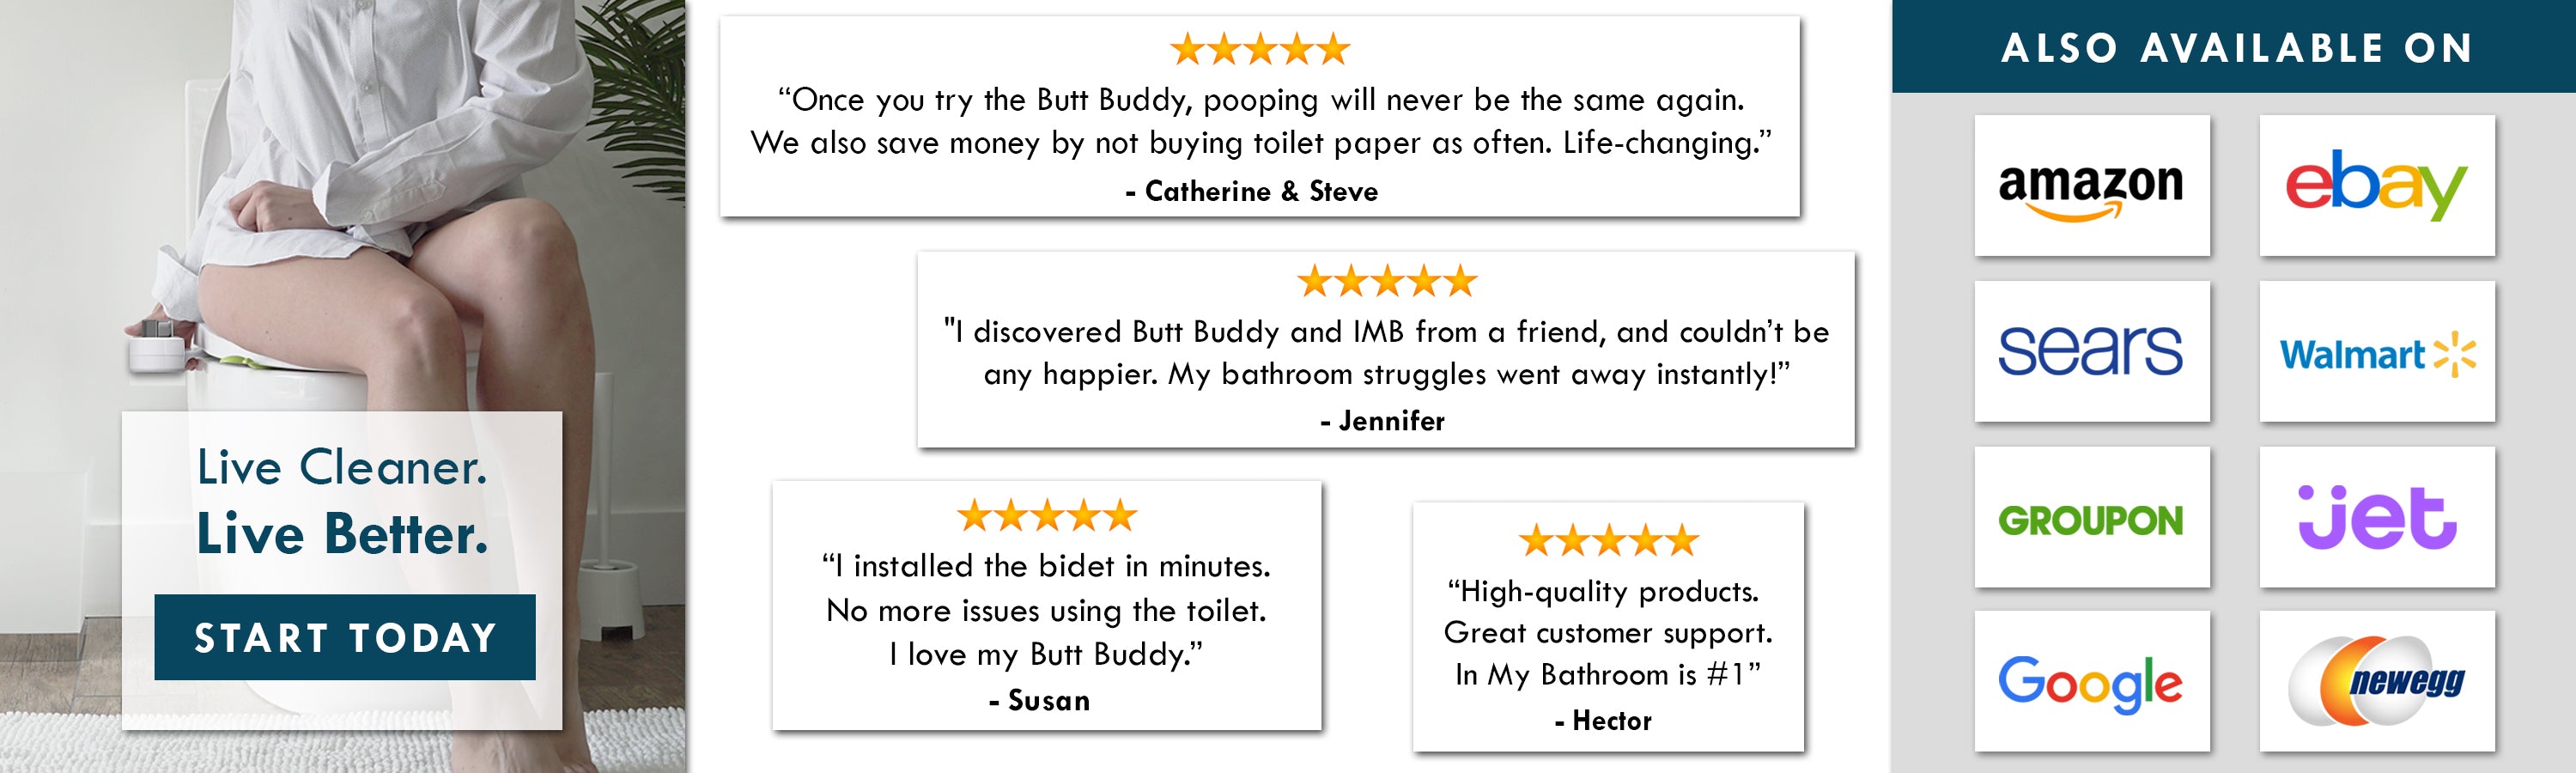 In My Bathroom (IMB) | Butt Buddy - Bidet Toilet Attachment - BBB - Live Cleaner, Live Better - 5 Star Product - Reviews - Also Available On - Amazon - Walmart - Ebay - Stores